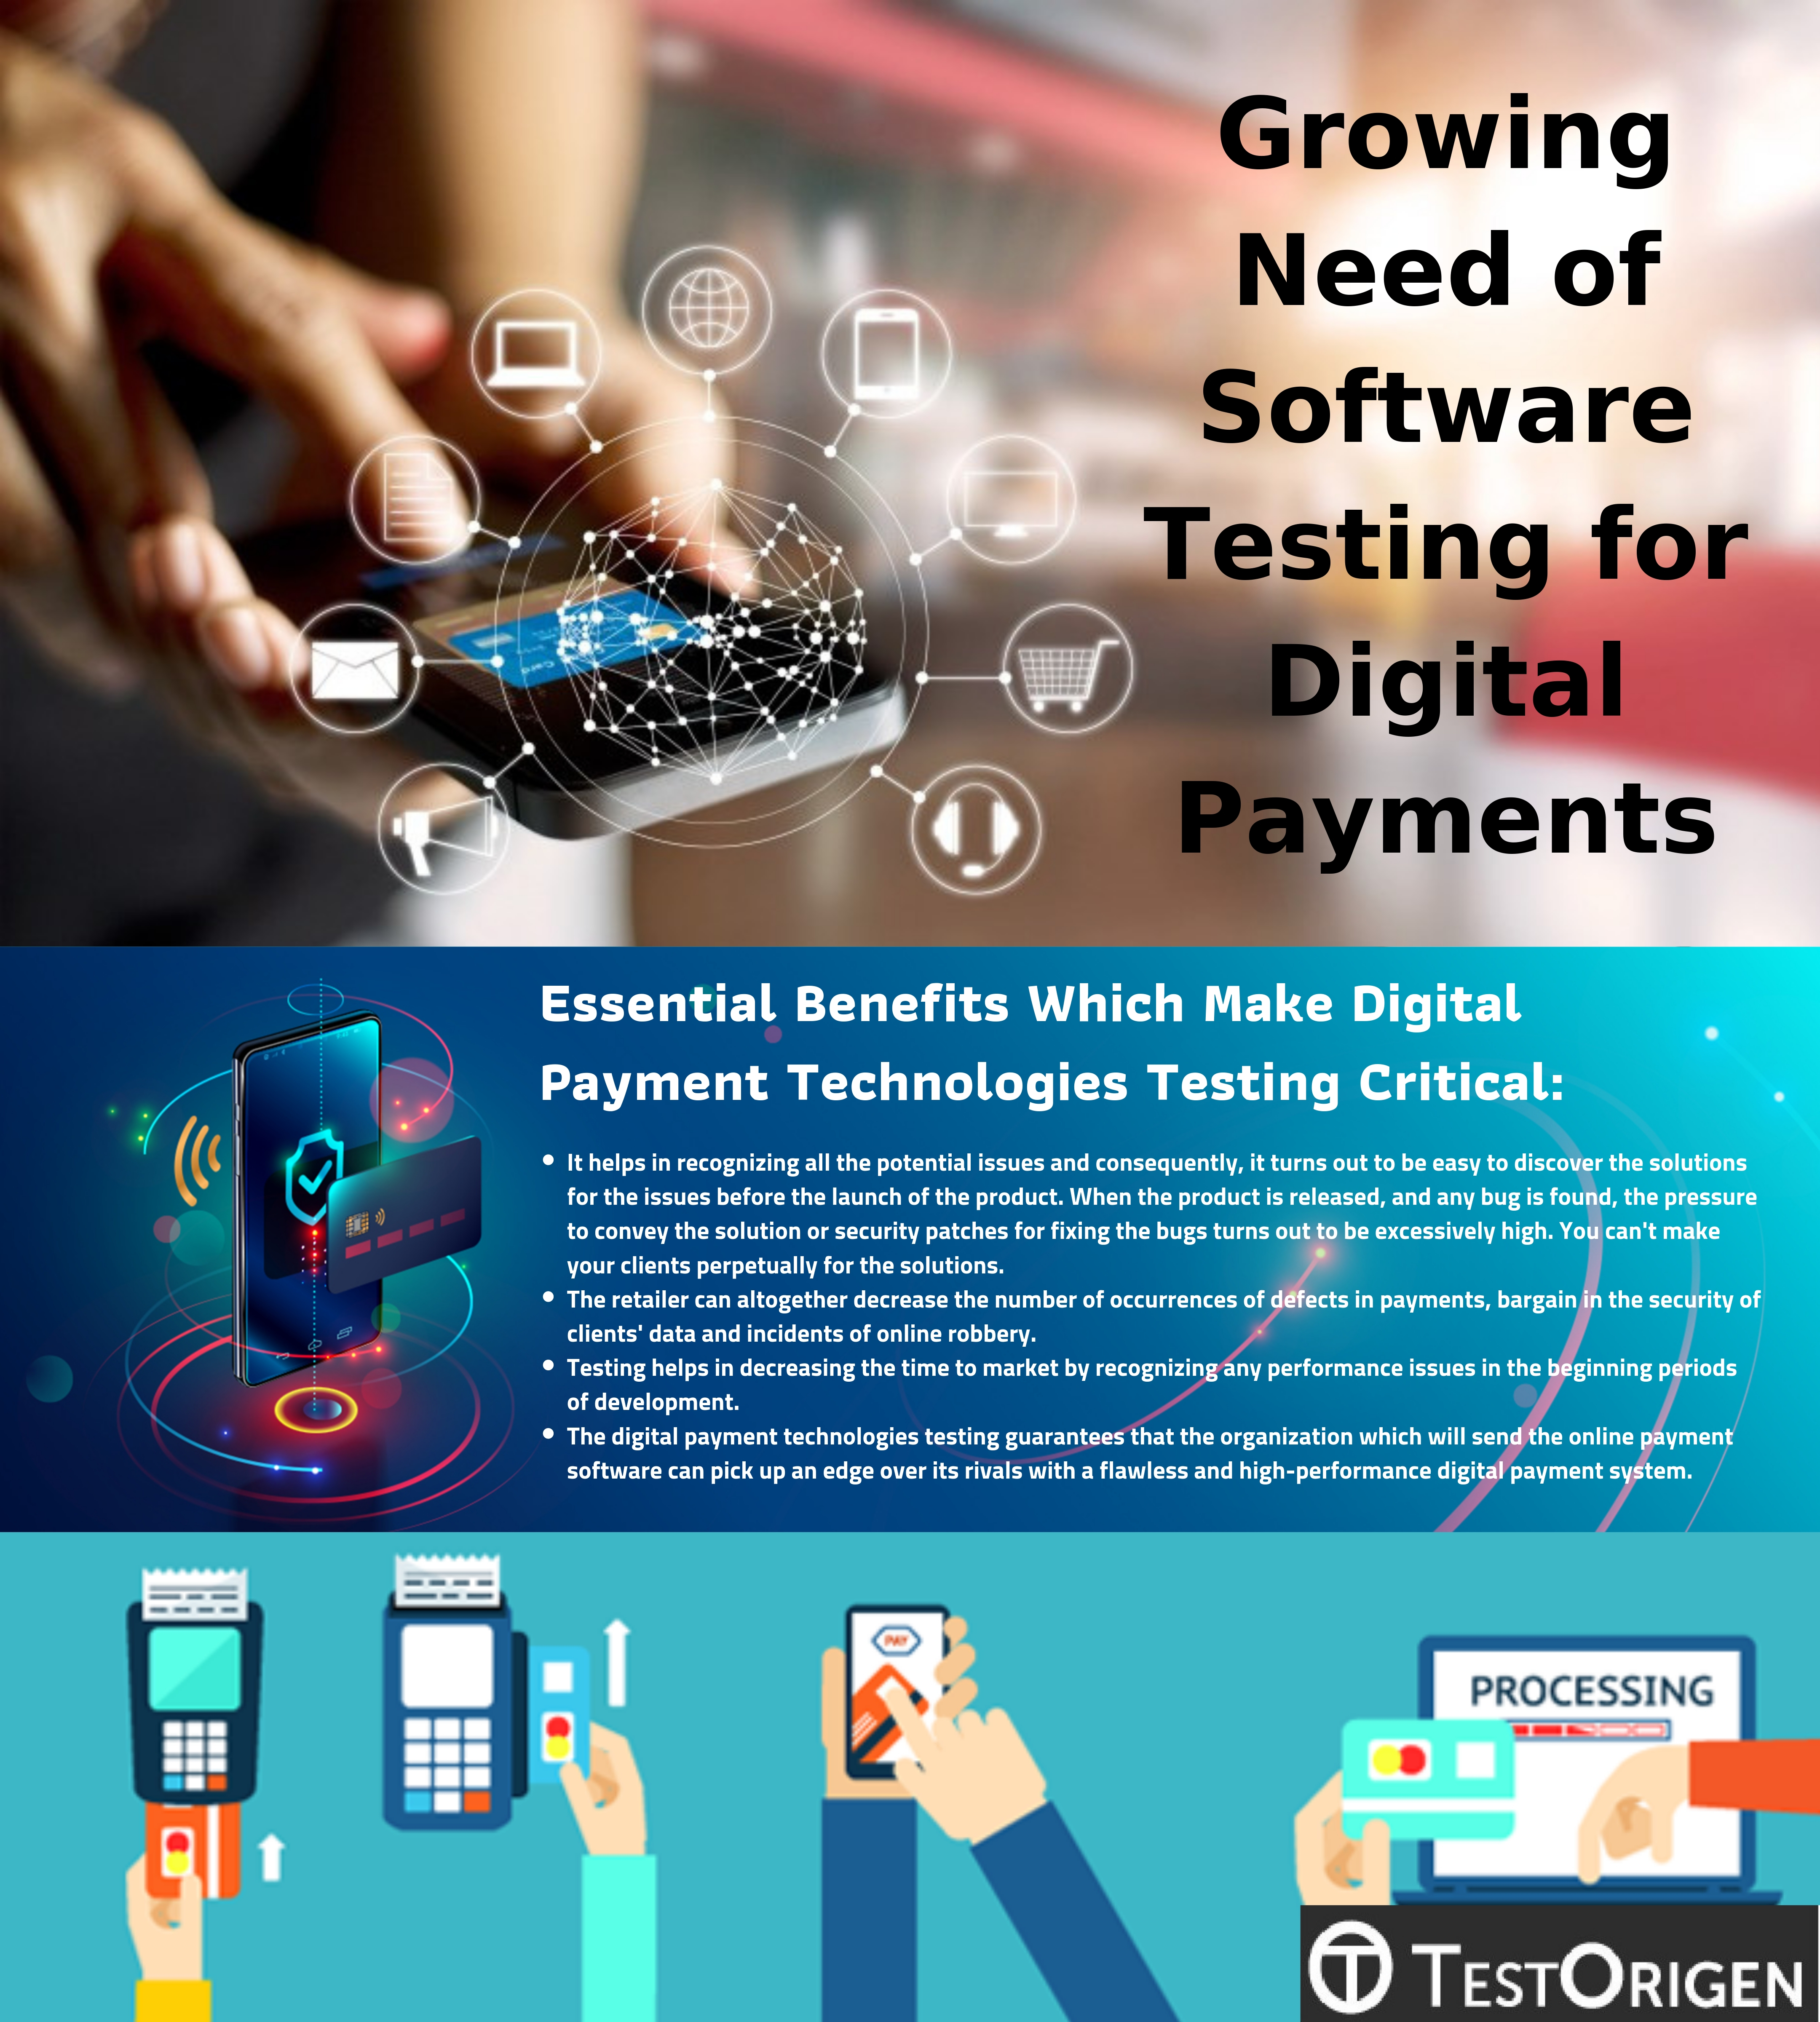 Growing Need of Software Testing for Digital Payments. digital payment technologies